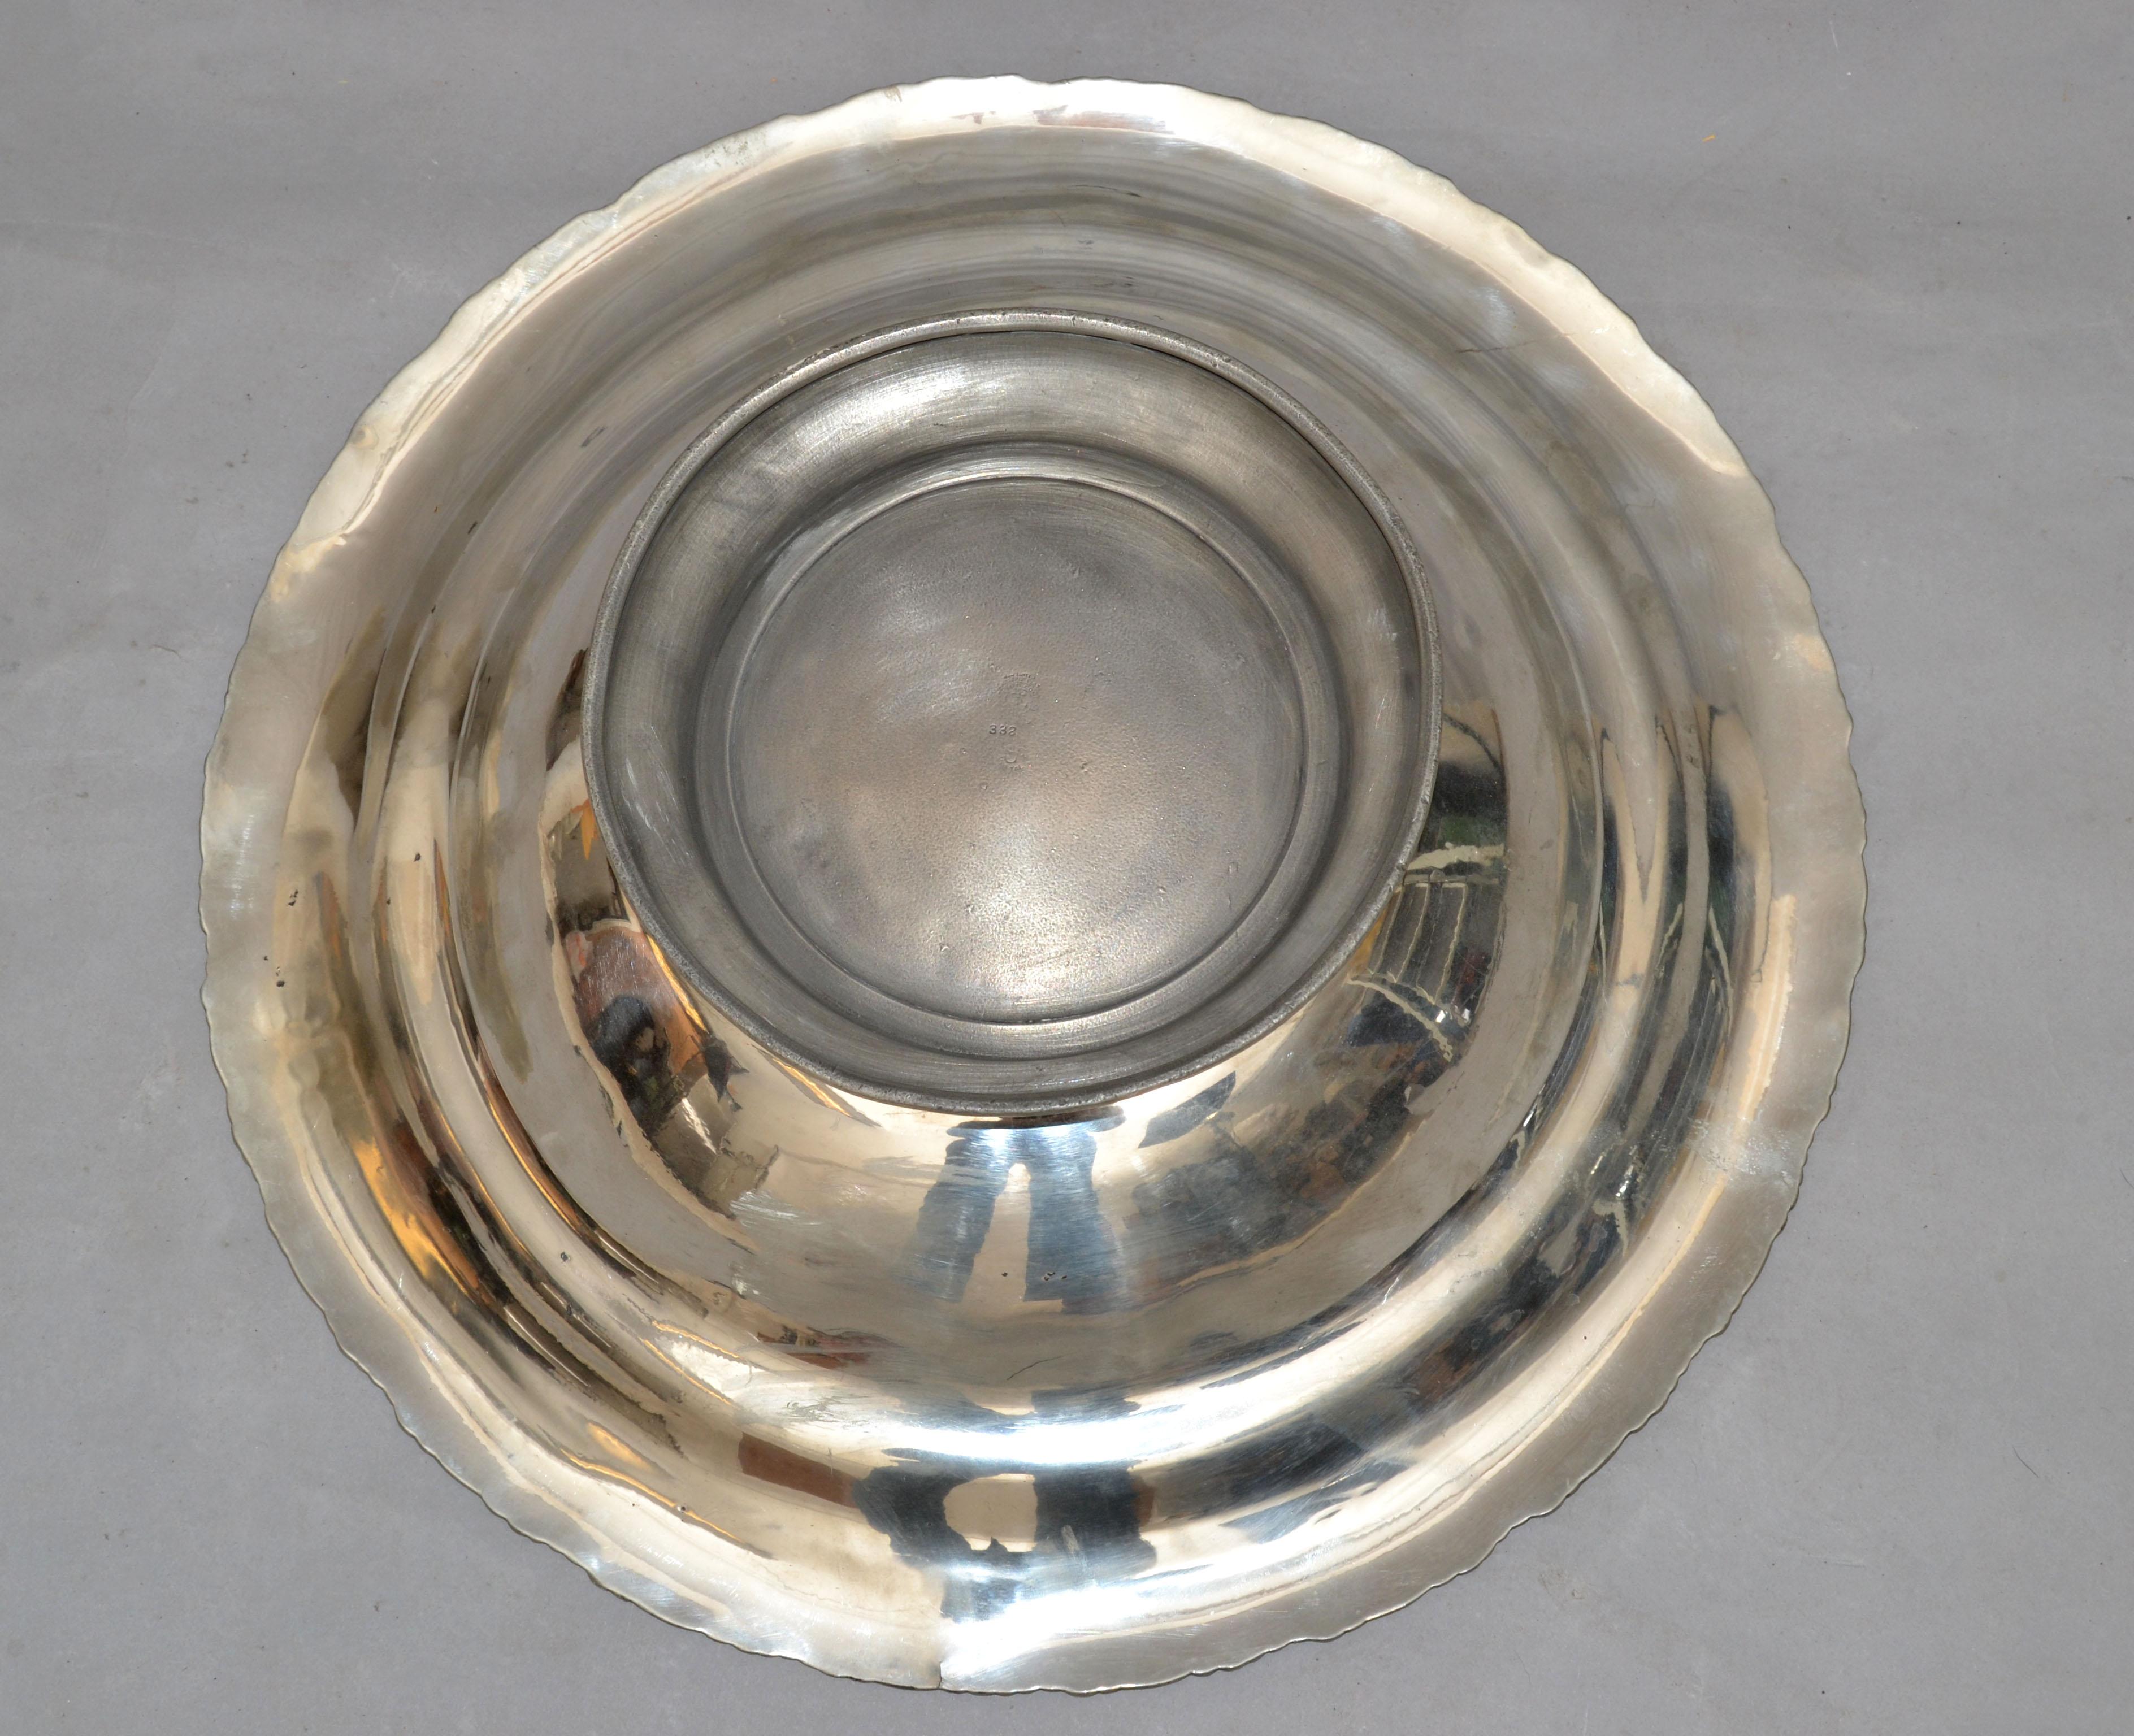 English Silver Plate Trademark Ornate Large Bowl Footed Serving Dish Punch Bowl im Angebot 4